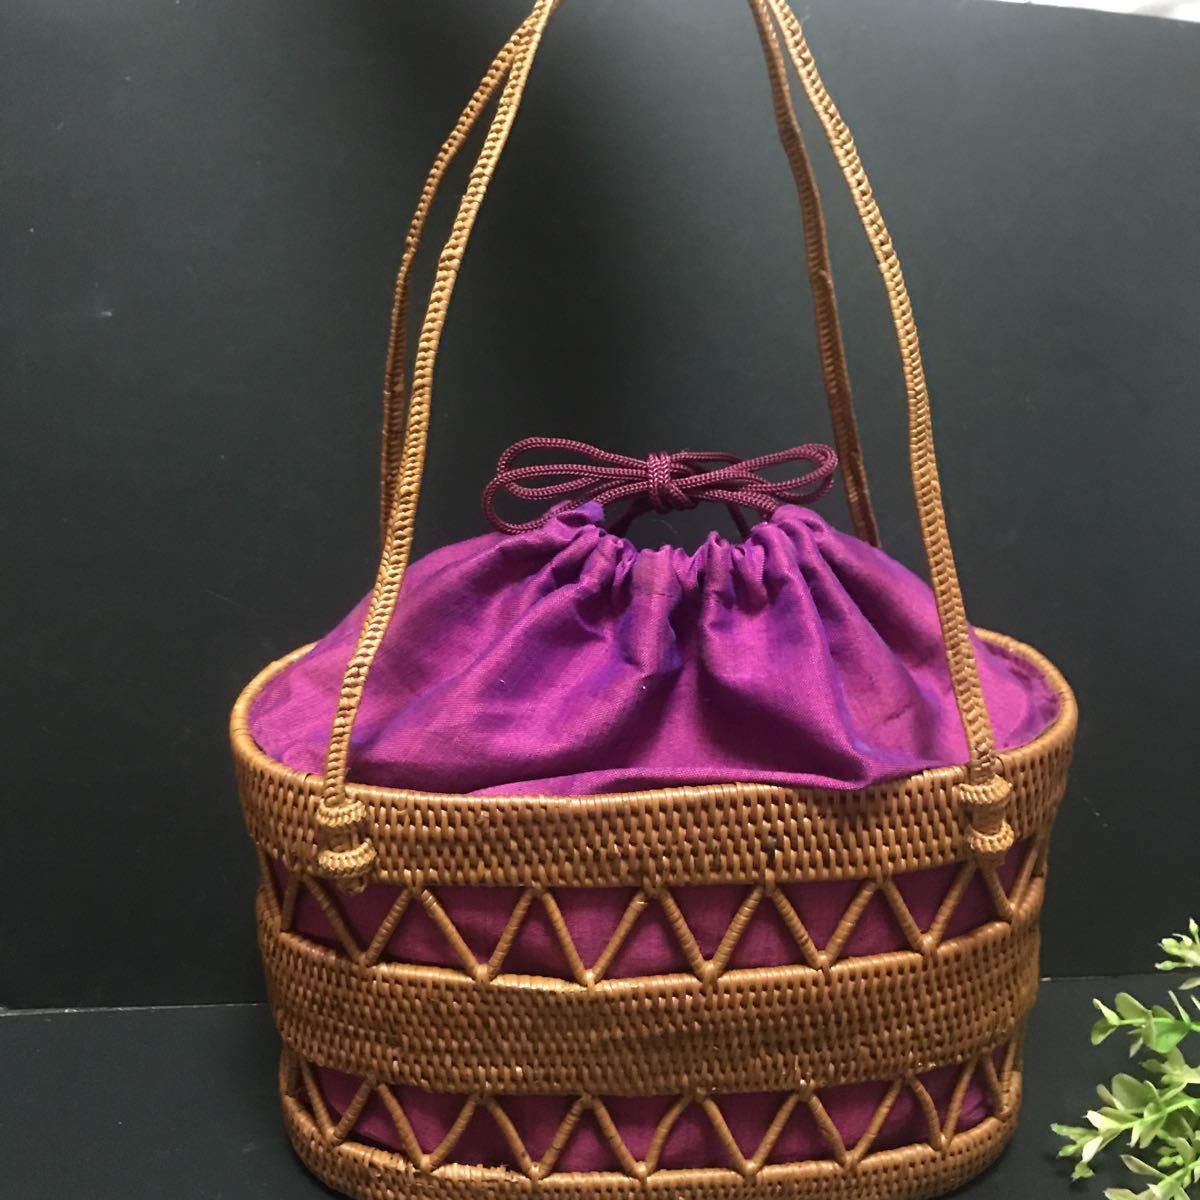 ata basket bag inside cloth attaching beautiful goods tradition industrial arts 